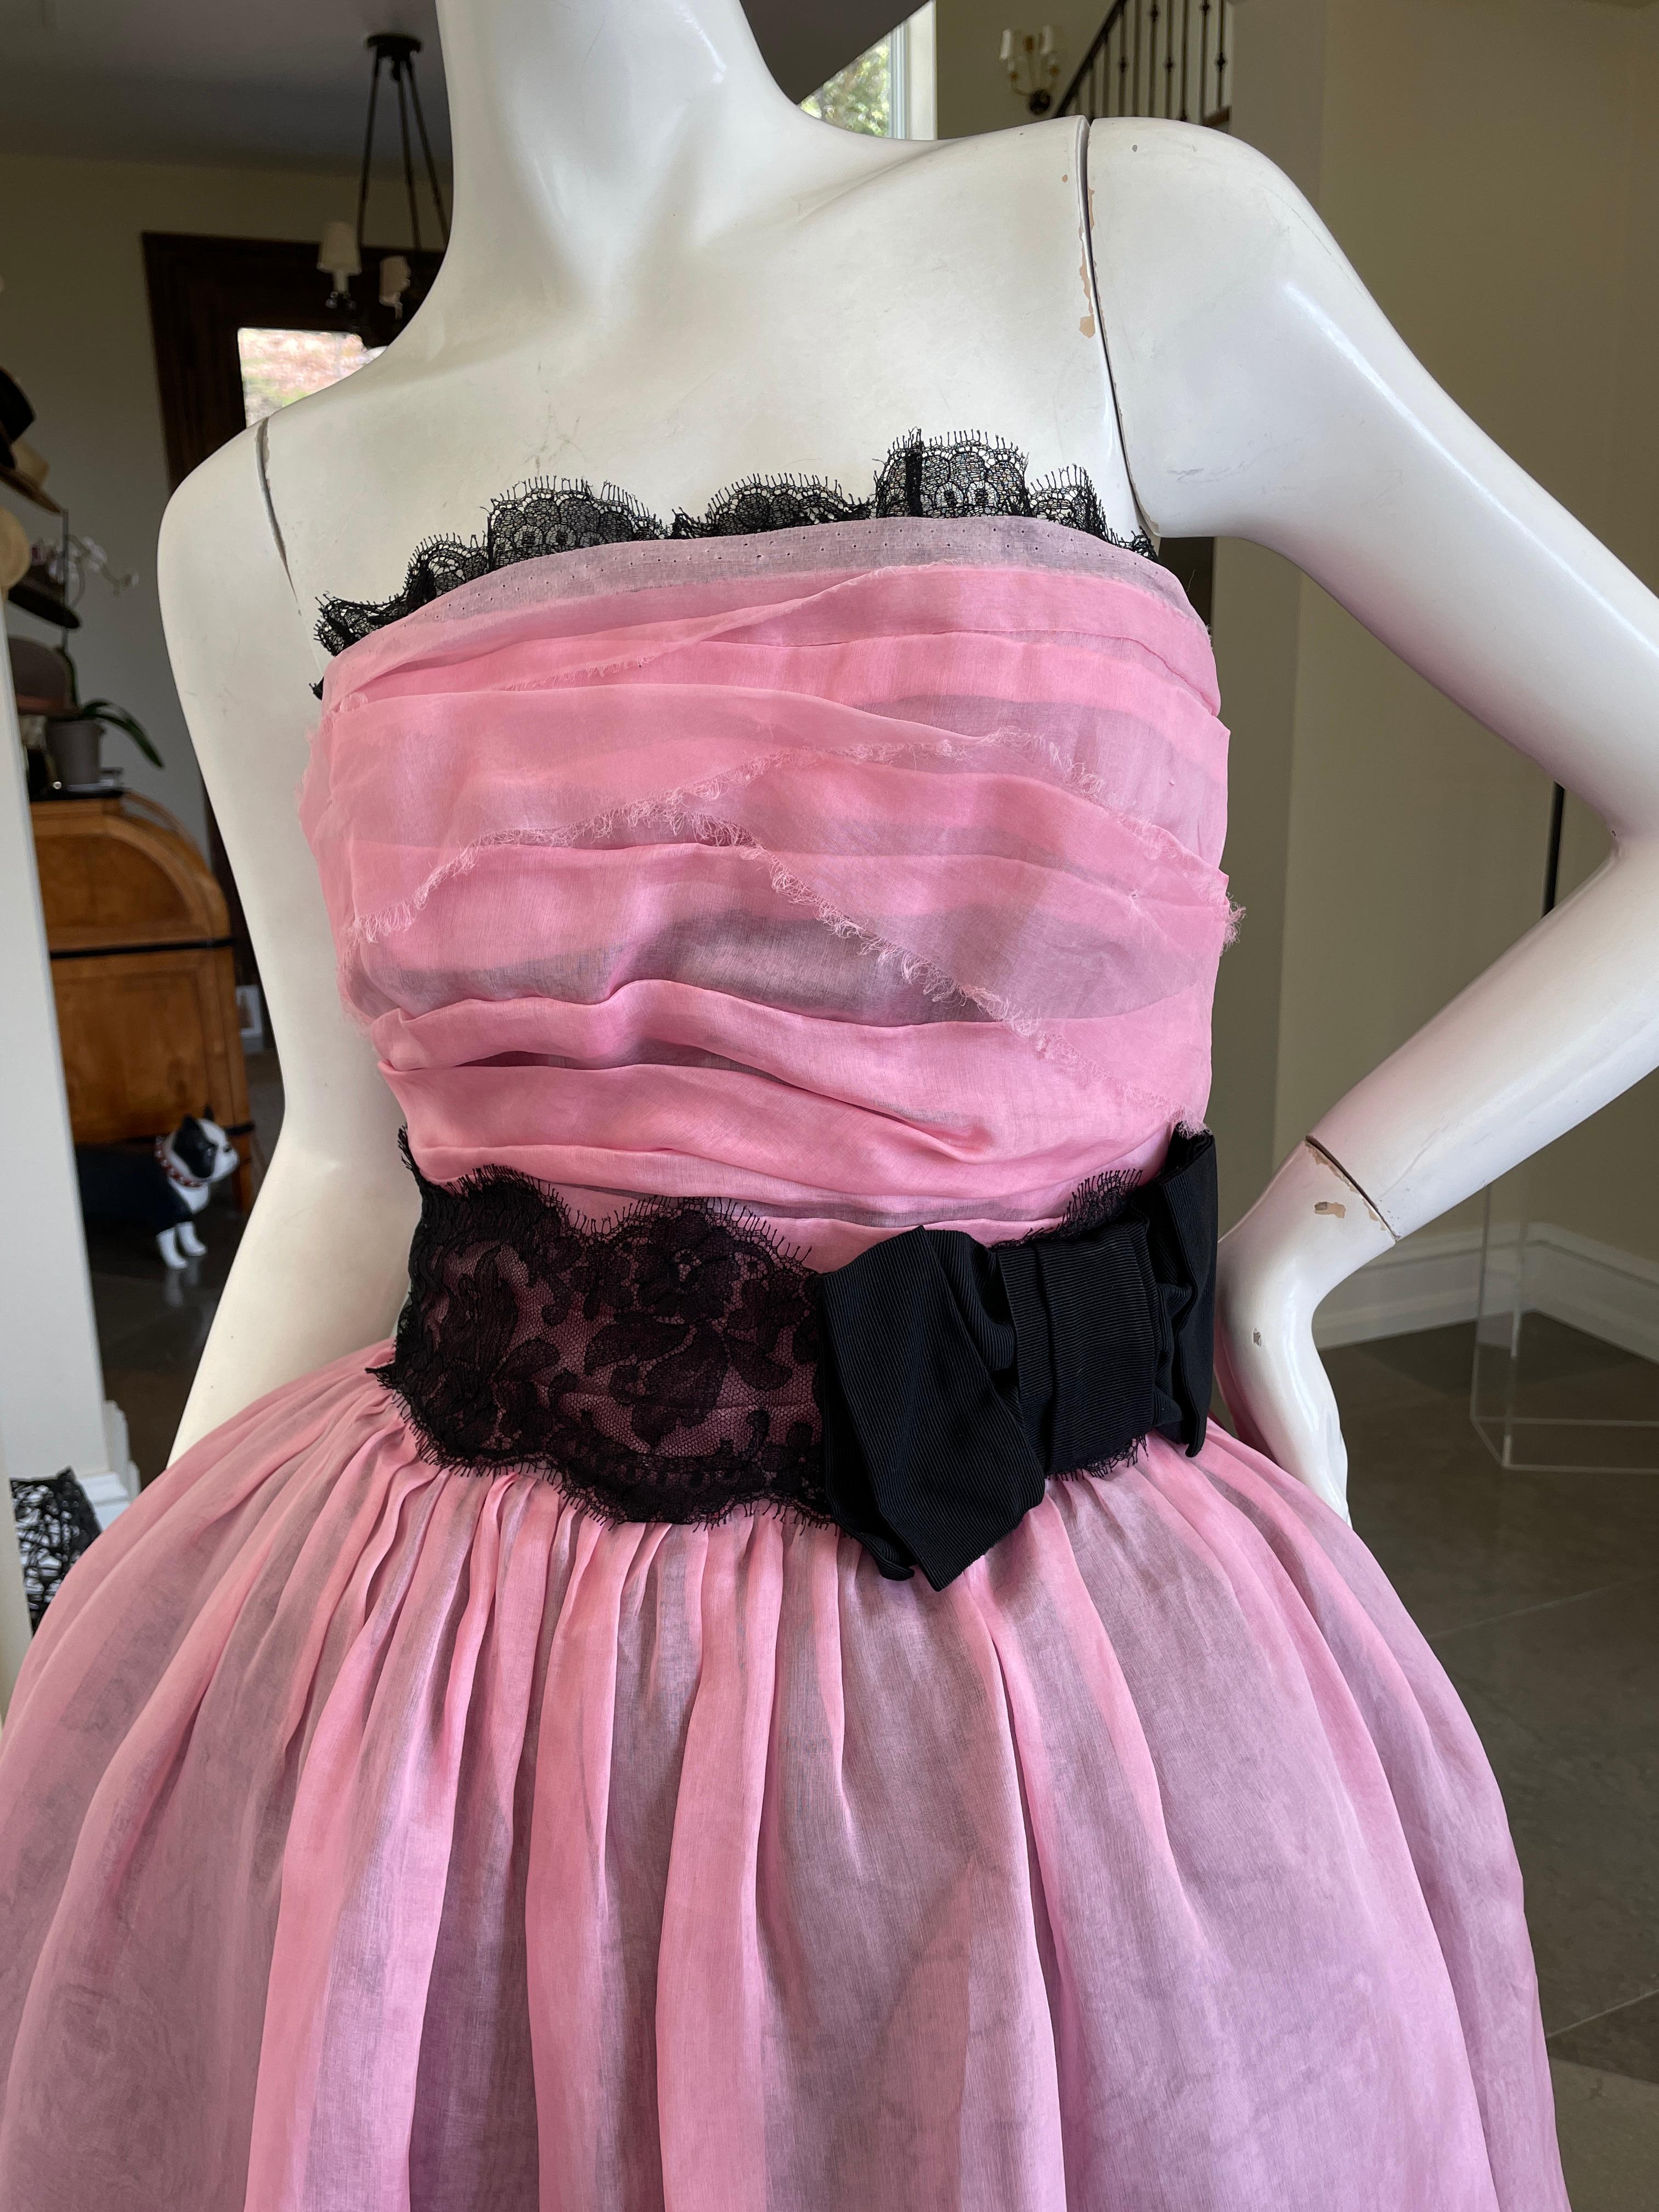 Dolce & Gabbana Pink 1950's Style Vintage Cocktail Dress w Corset Lacing Detail  For Sale 5